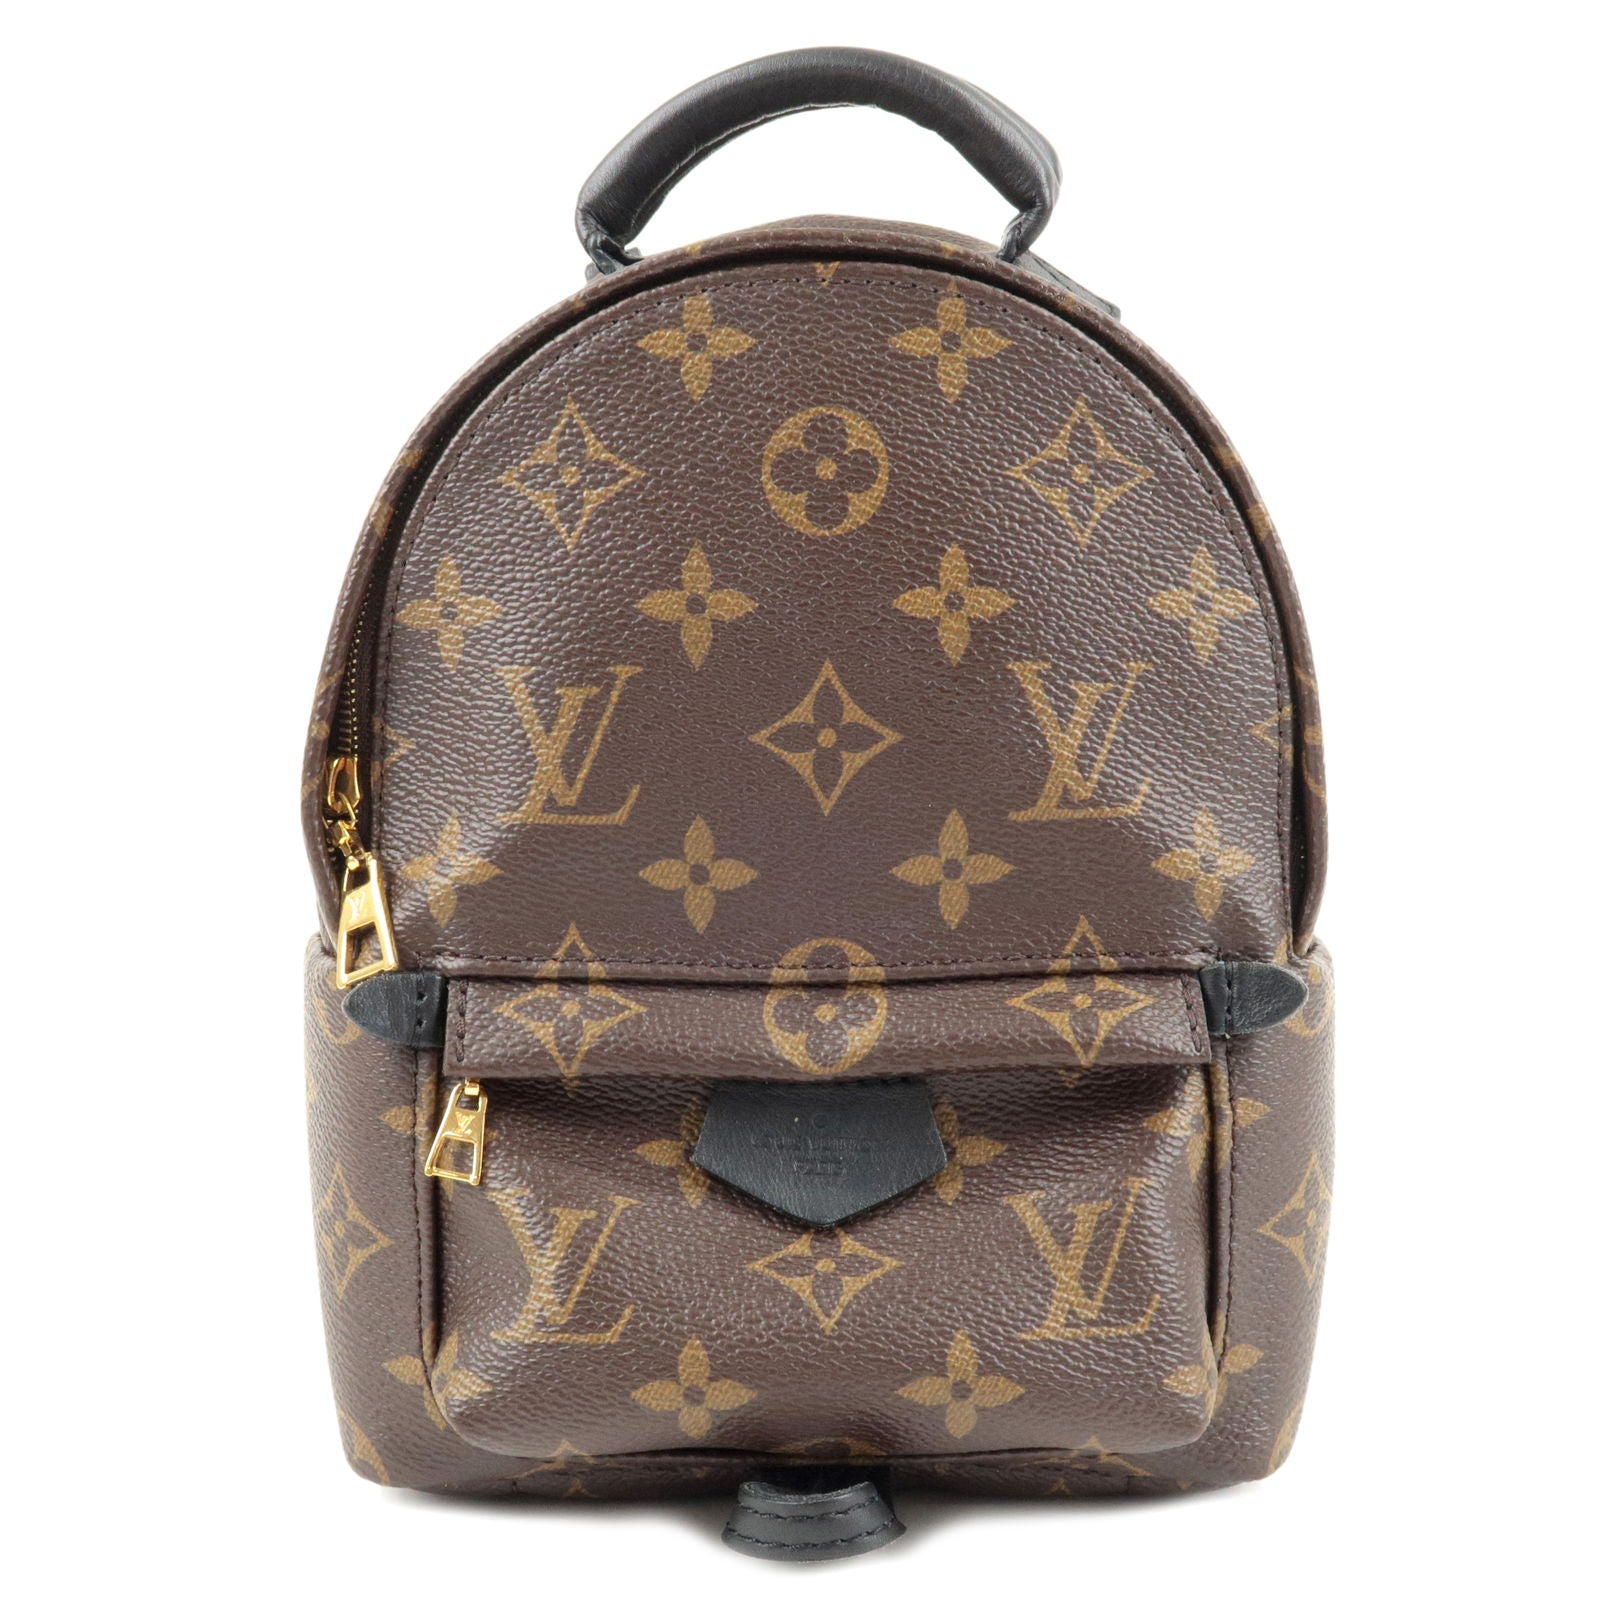 Where To Find Highest Tax-refund For Louis Vuitton Bag?